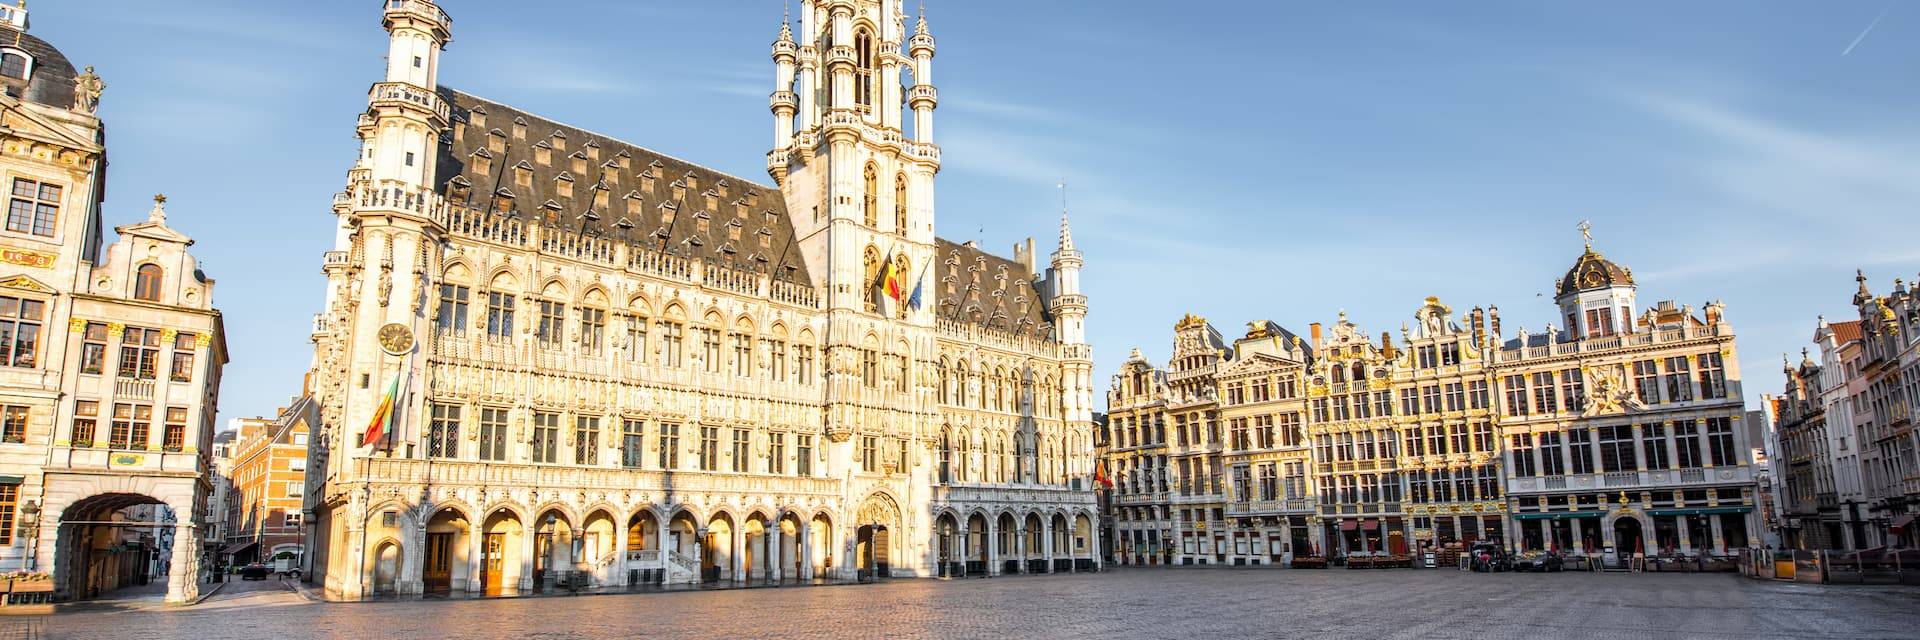 Essential Brussels Free Walking Tour: The Story of Brussels